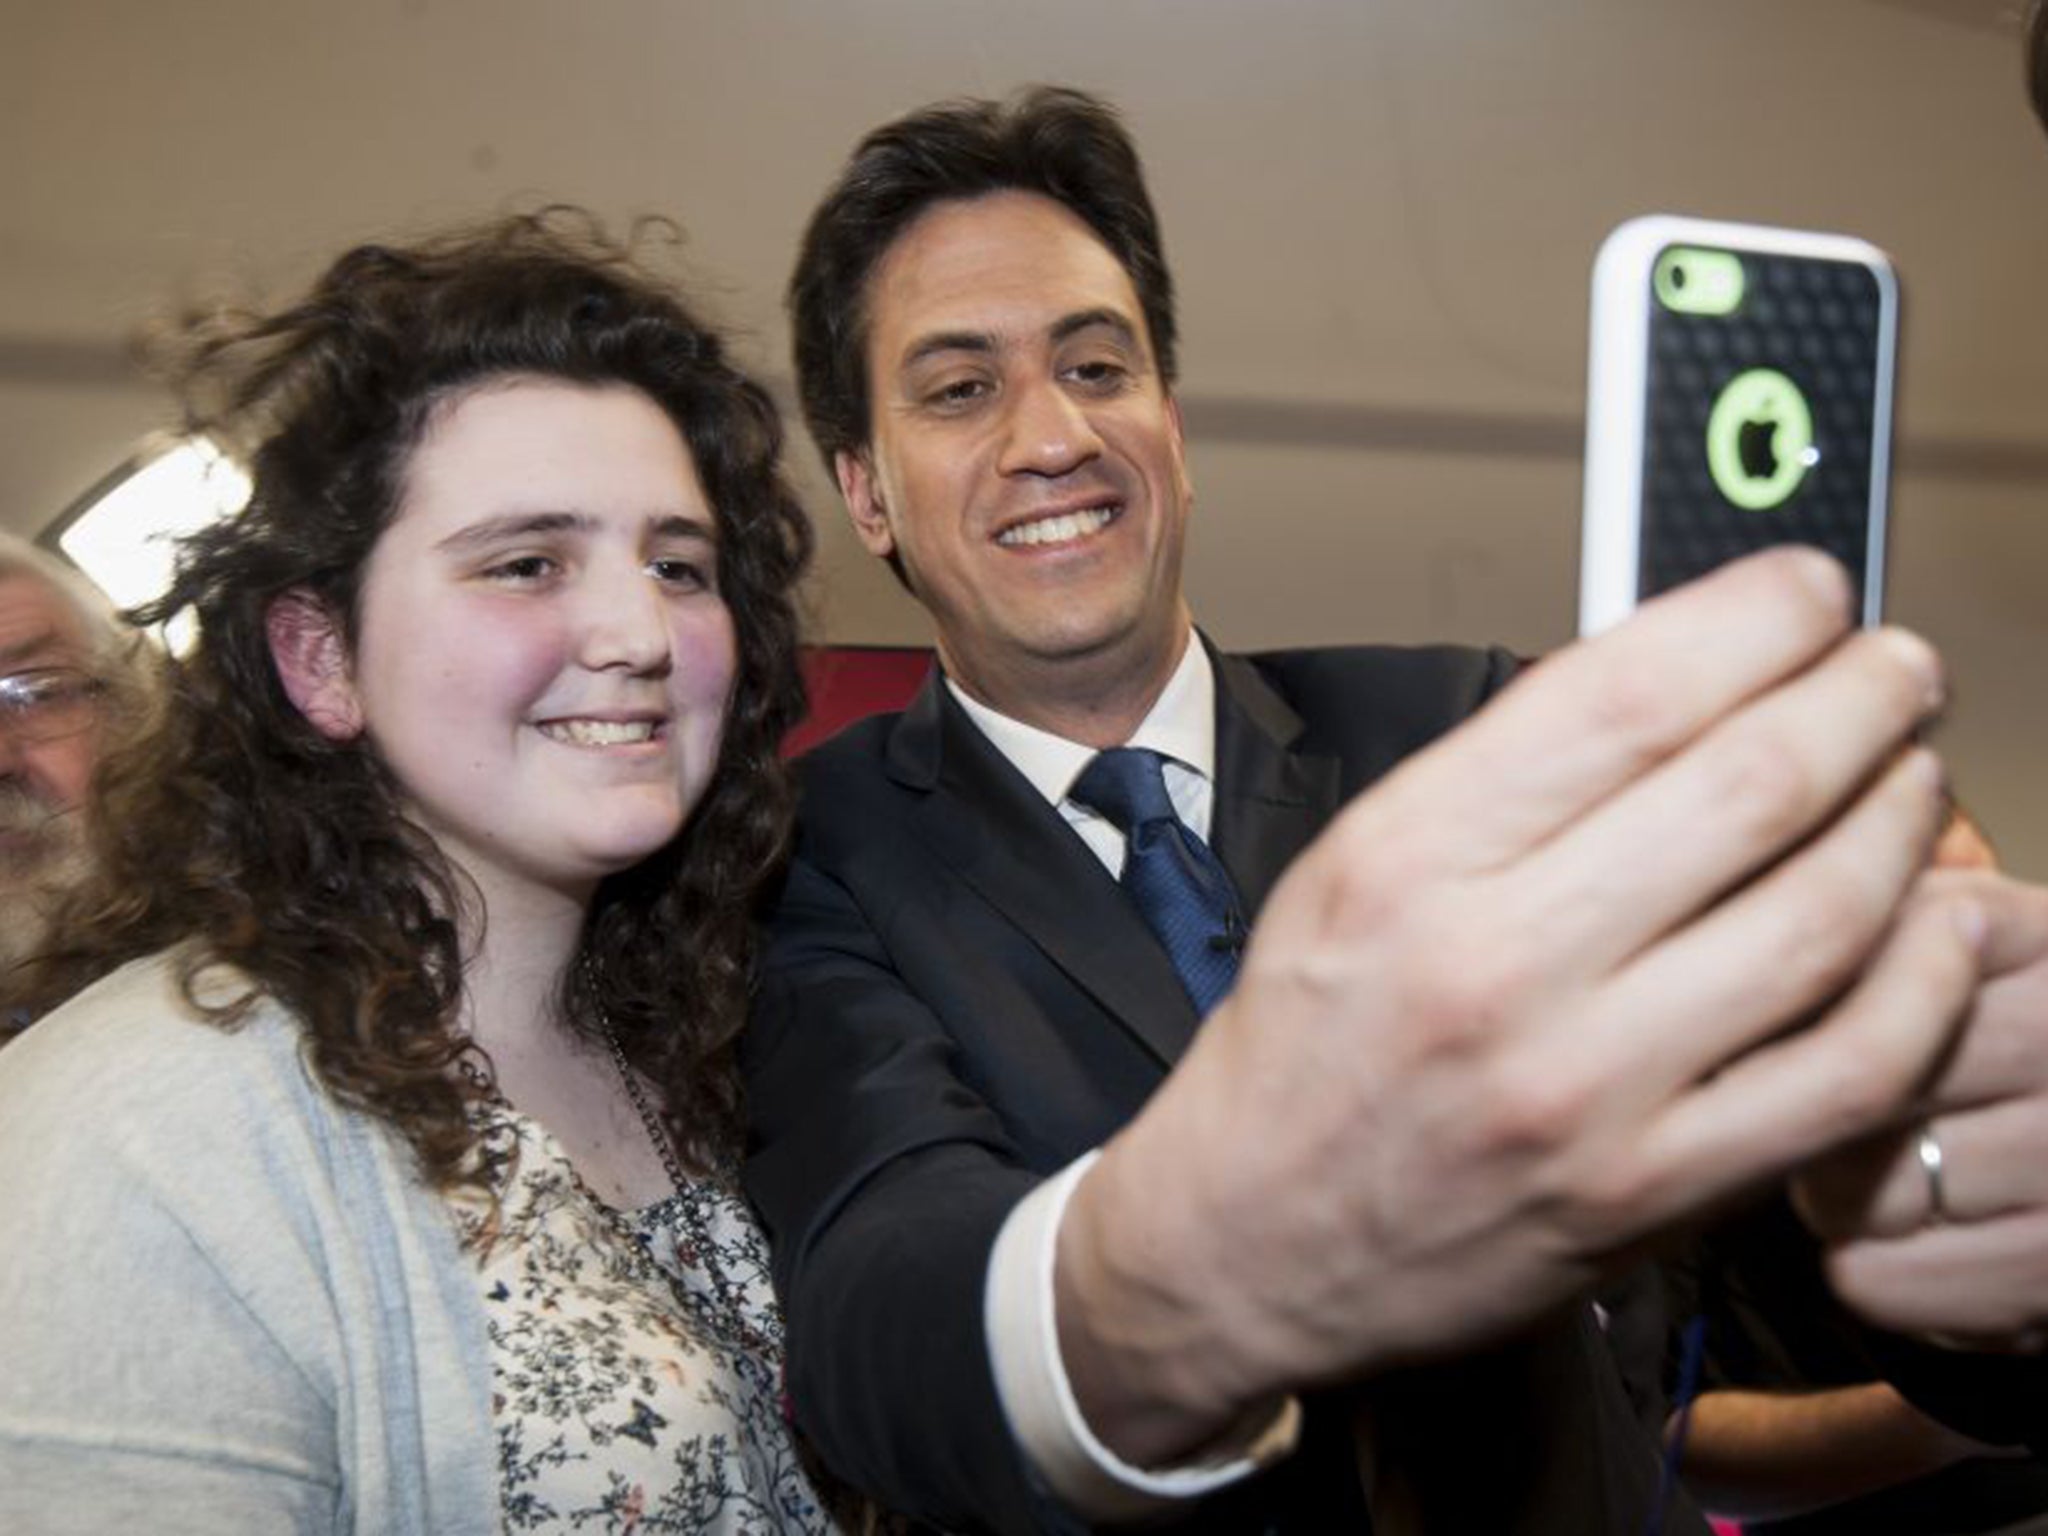 Ed Miliband started the year with a slew of buzzwords but was floored by the Edstone in May